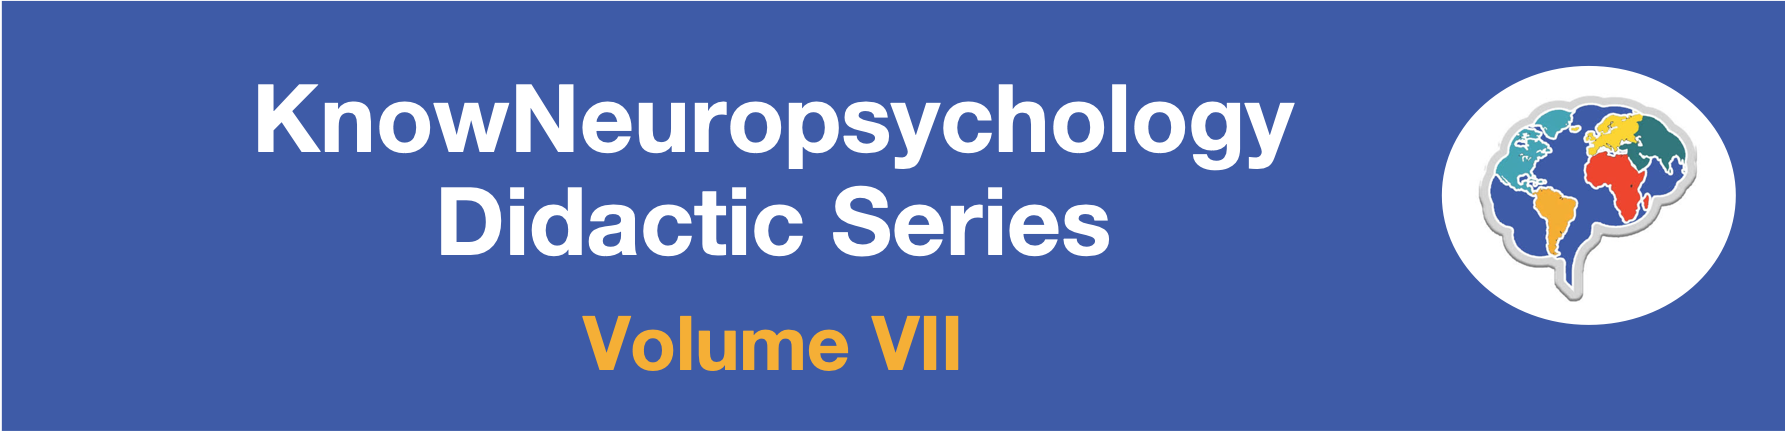 KnowNeuropsychology Didactic Series Volume VII